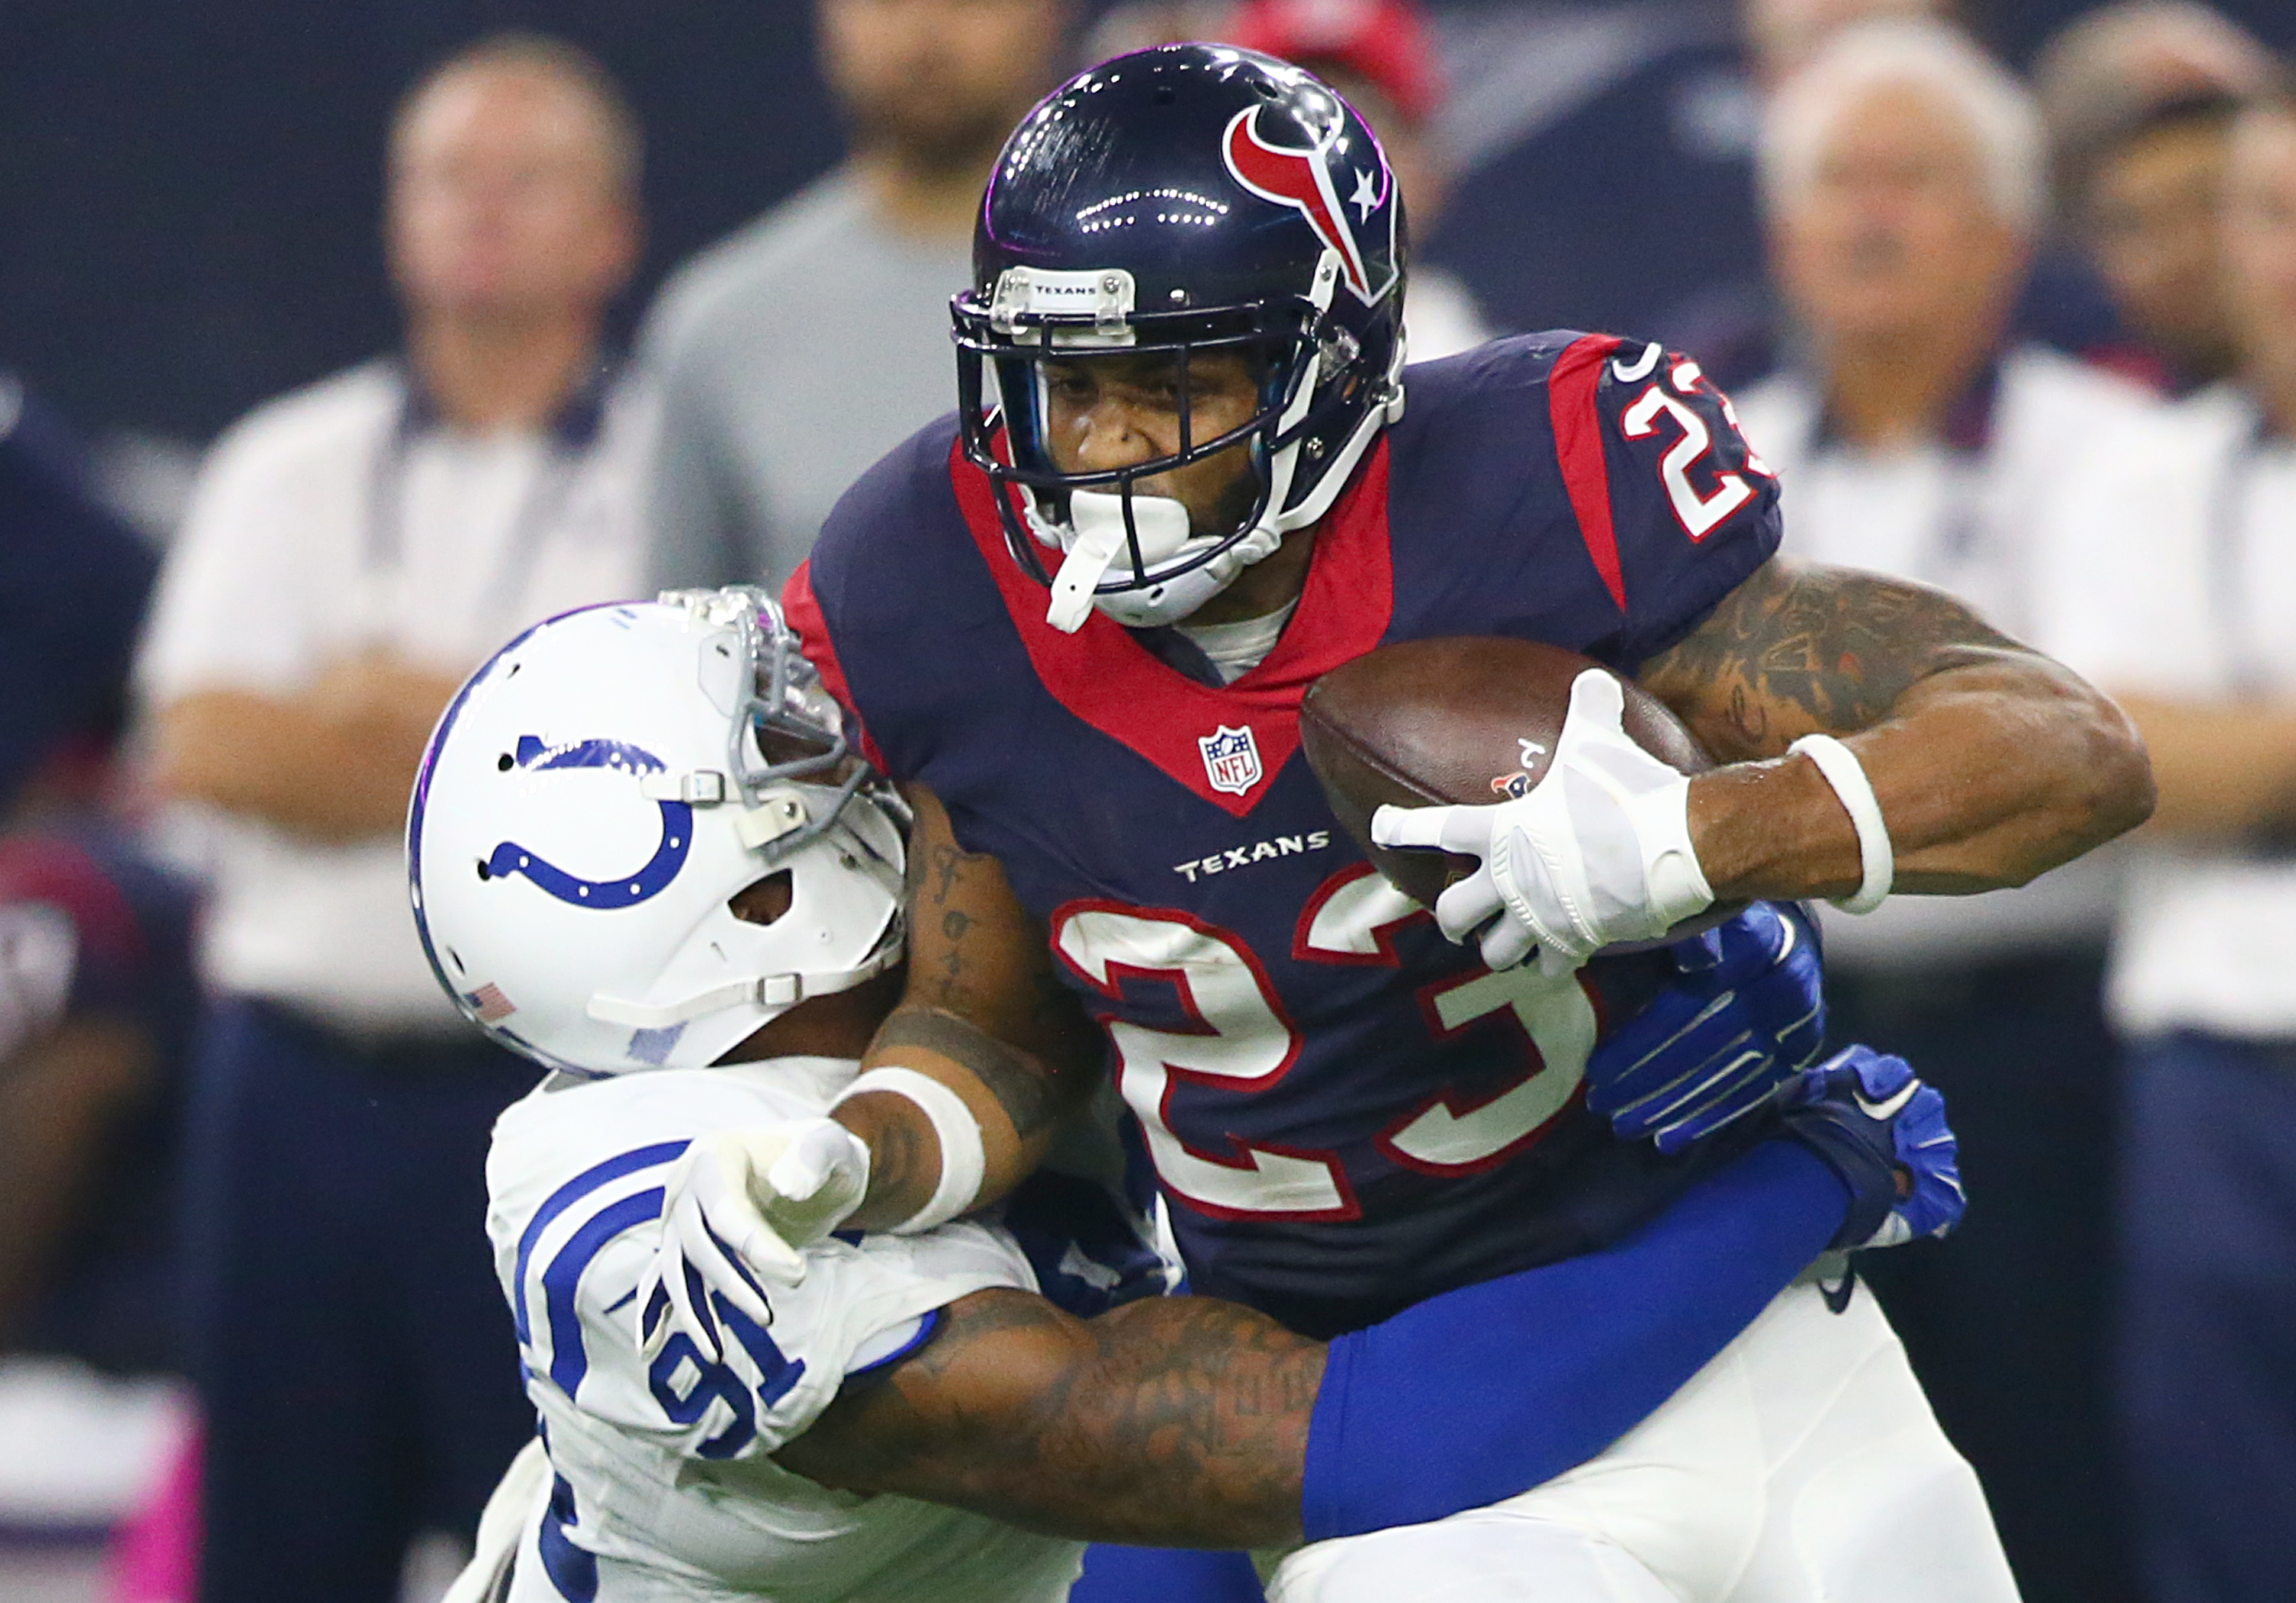 Arian Foster's return hasn't done much to improve the Texans 1-4 start. (Getty)